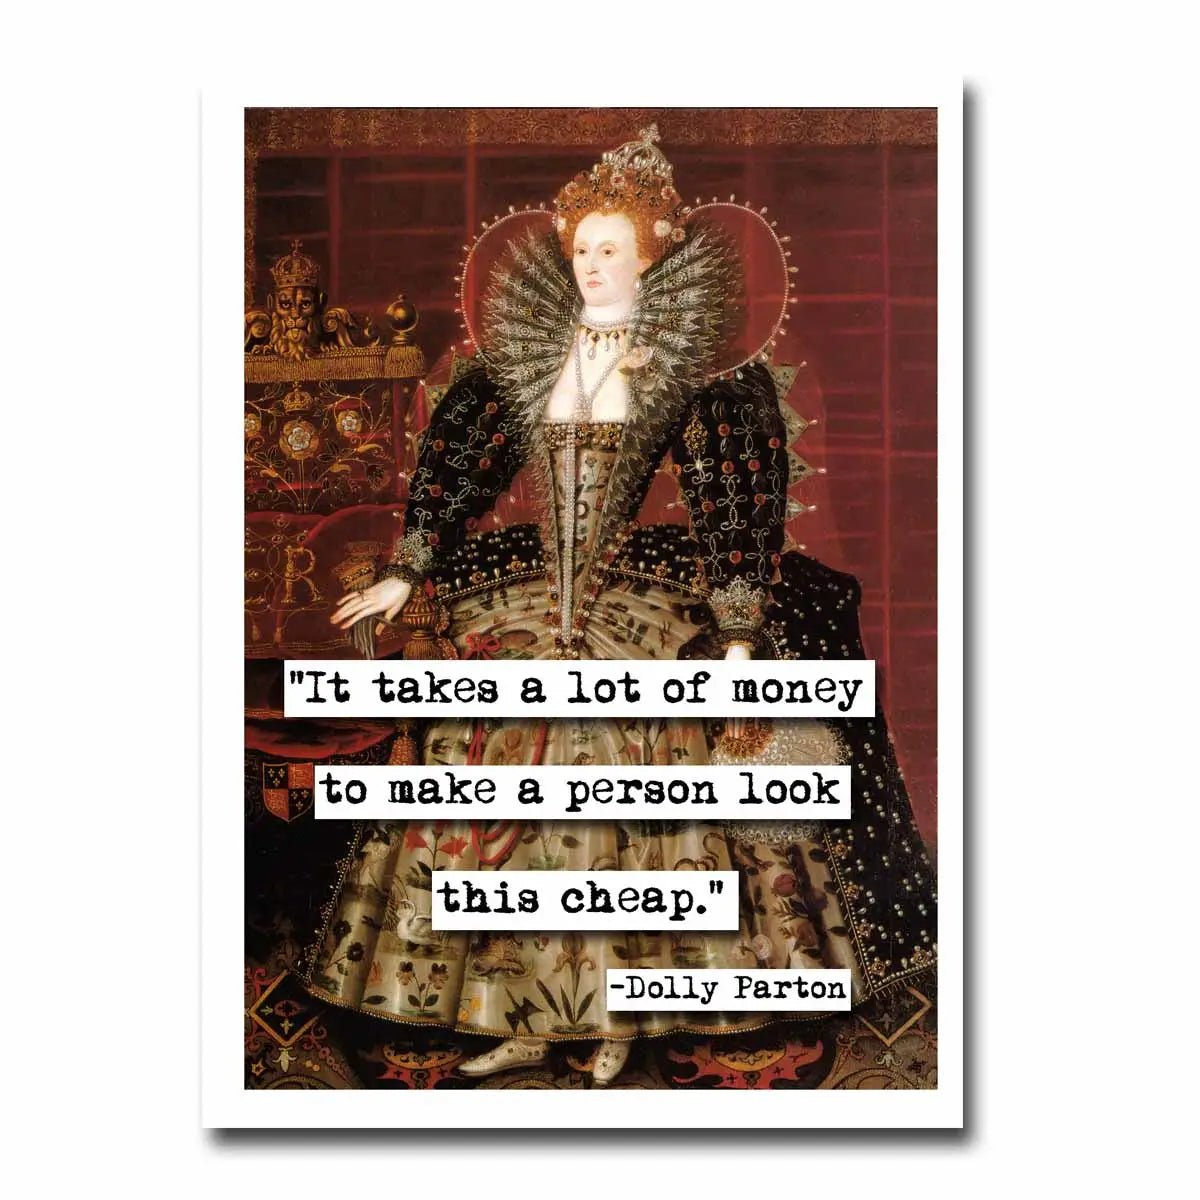 It Takes A Lot Of Money to Look This Cheap Dolly Parton Greeting Card | 4.5" x 6.25"